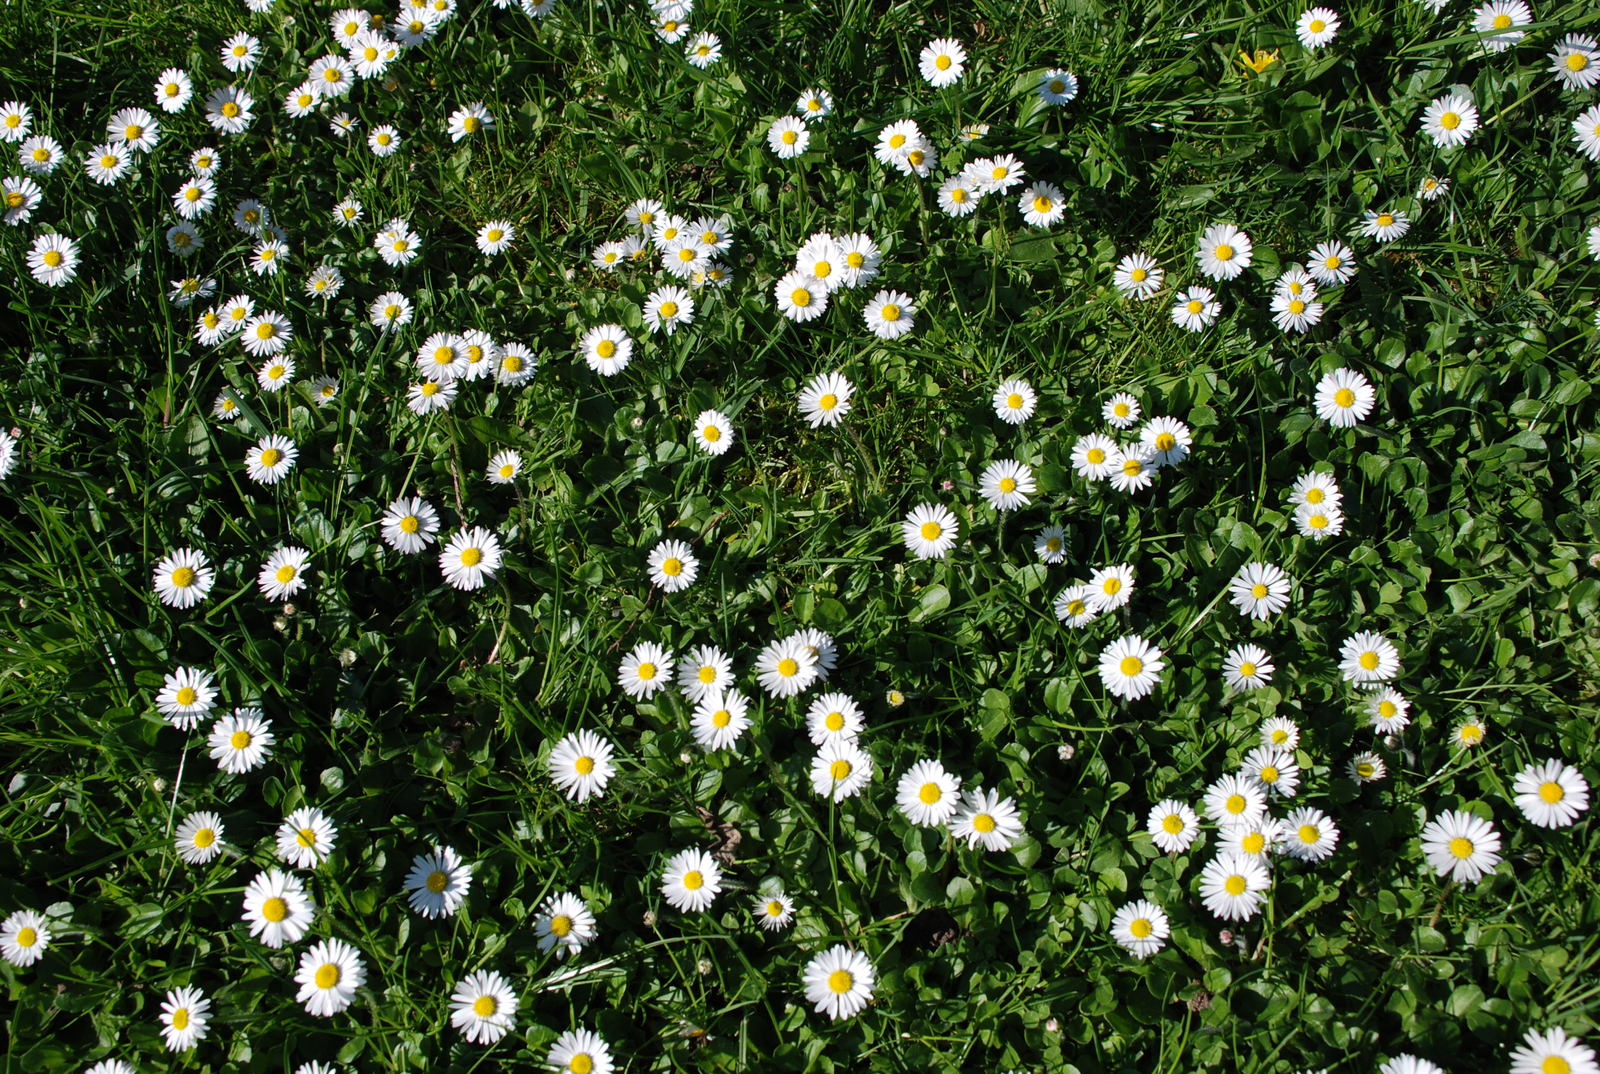 the view of a field of daisies from above